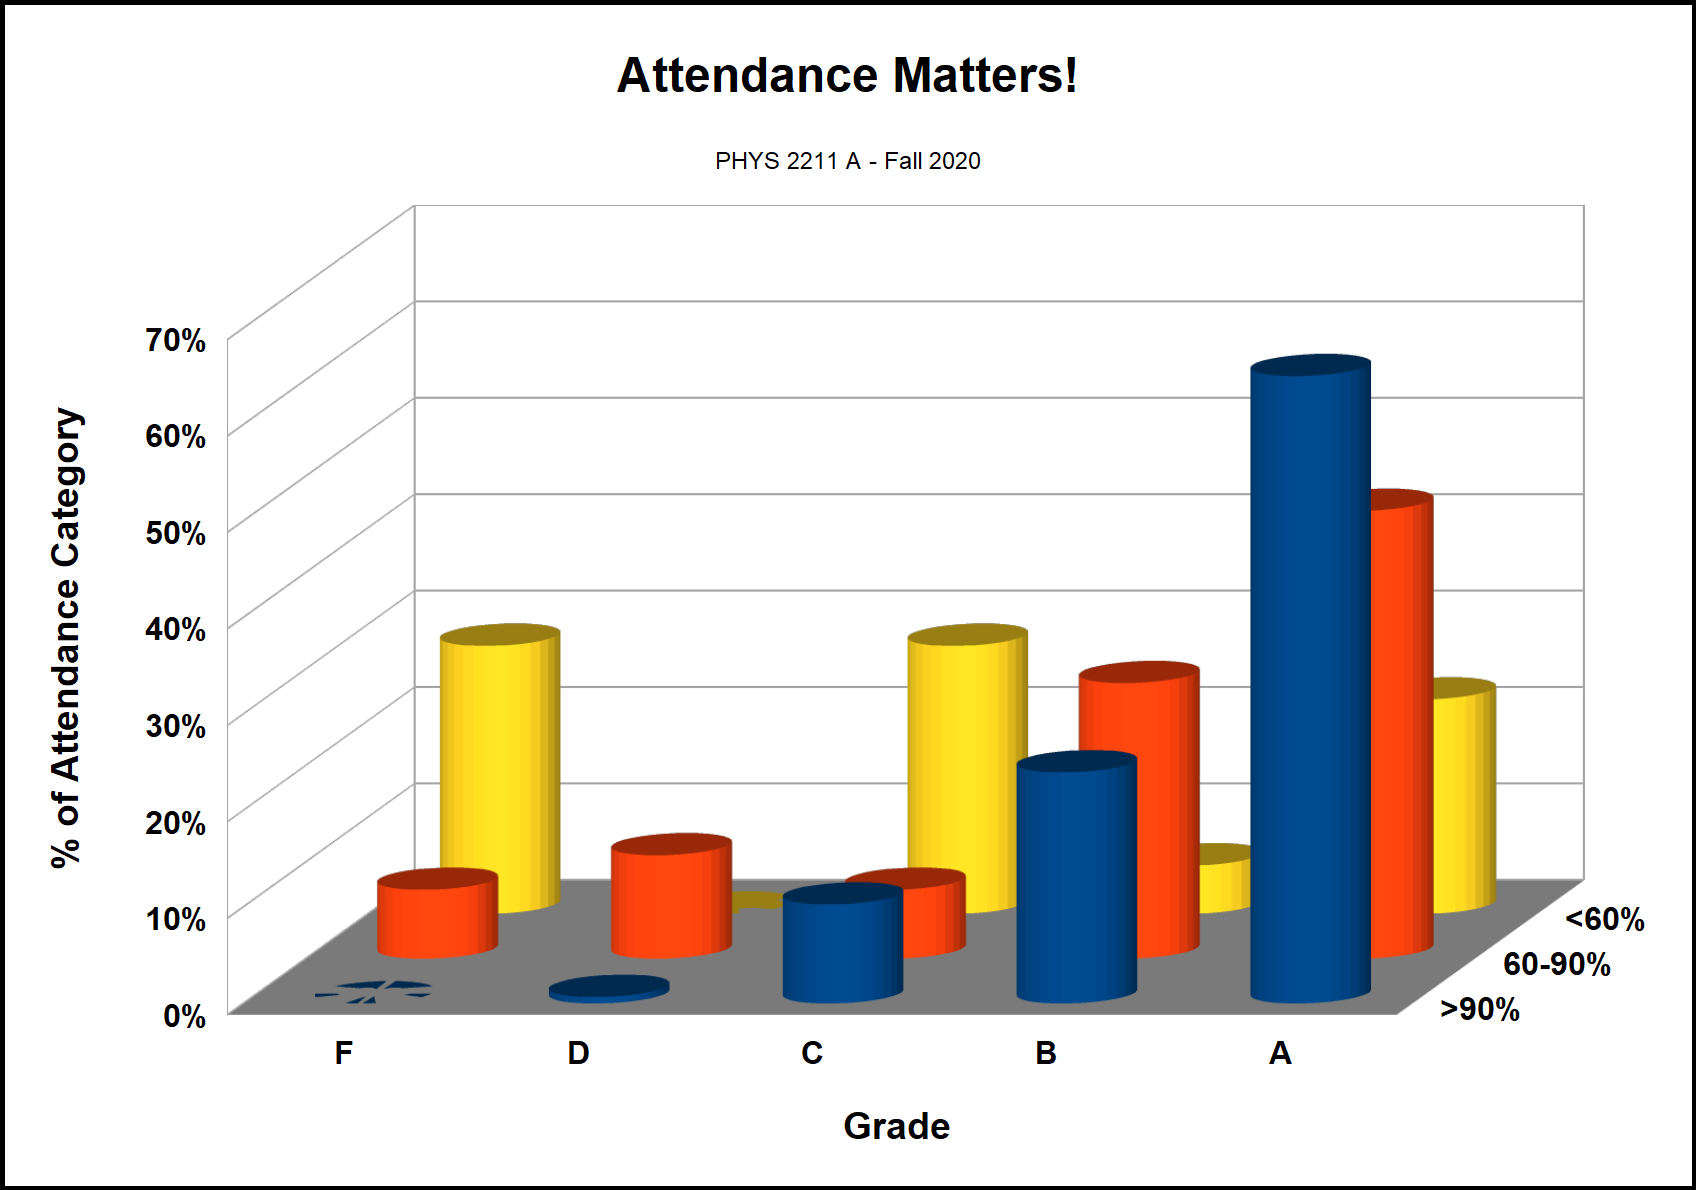 Students who attend class earn better grades